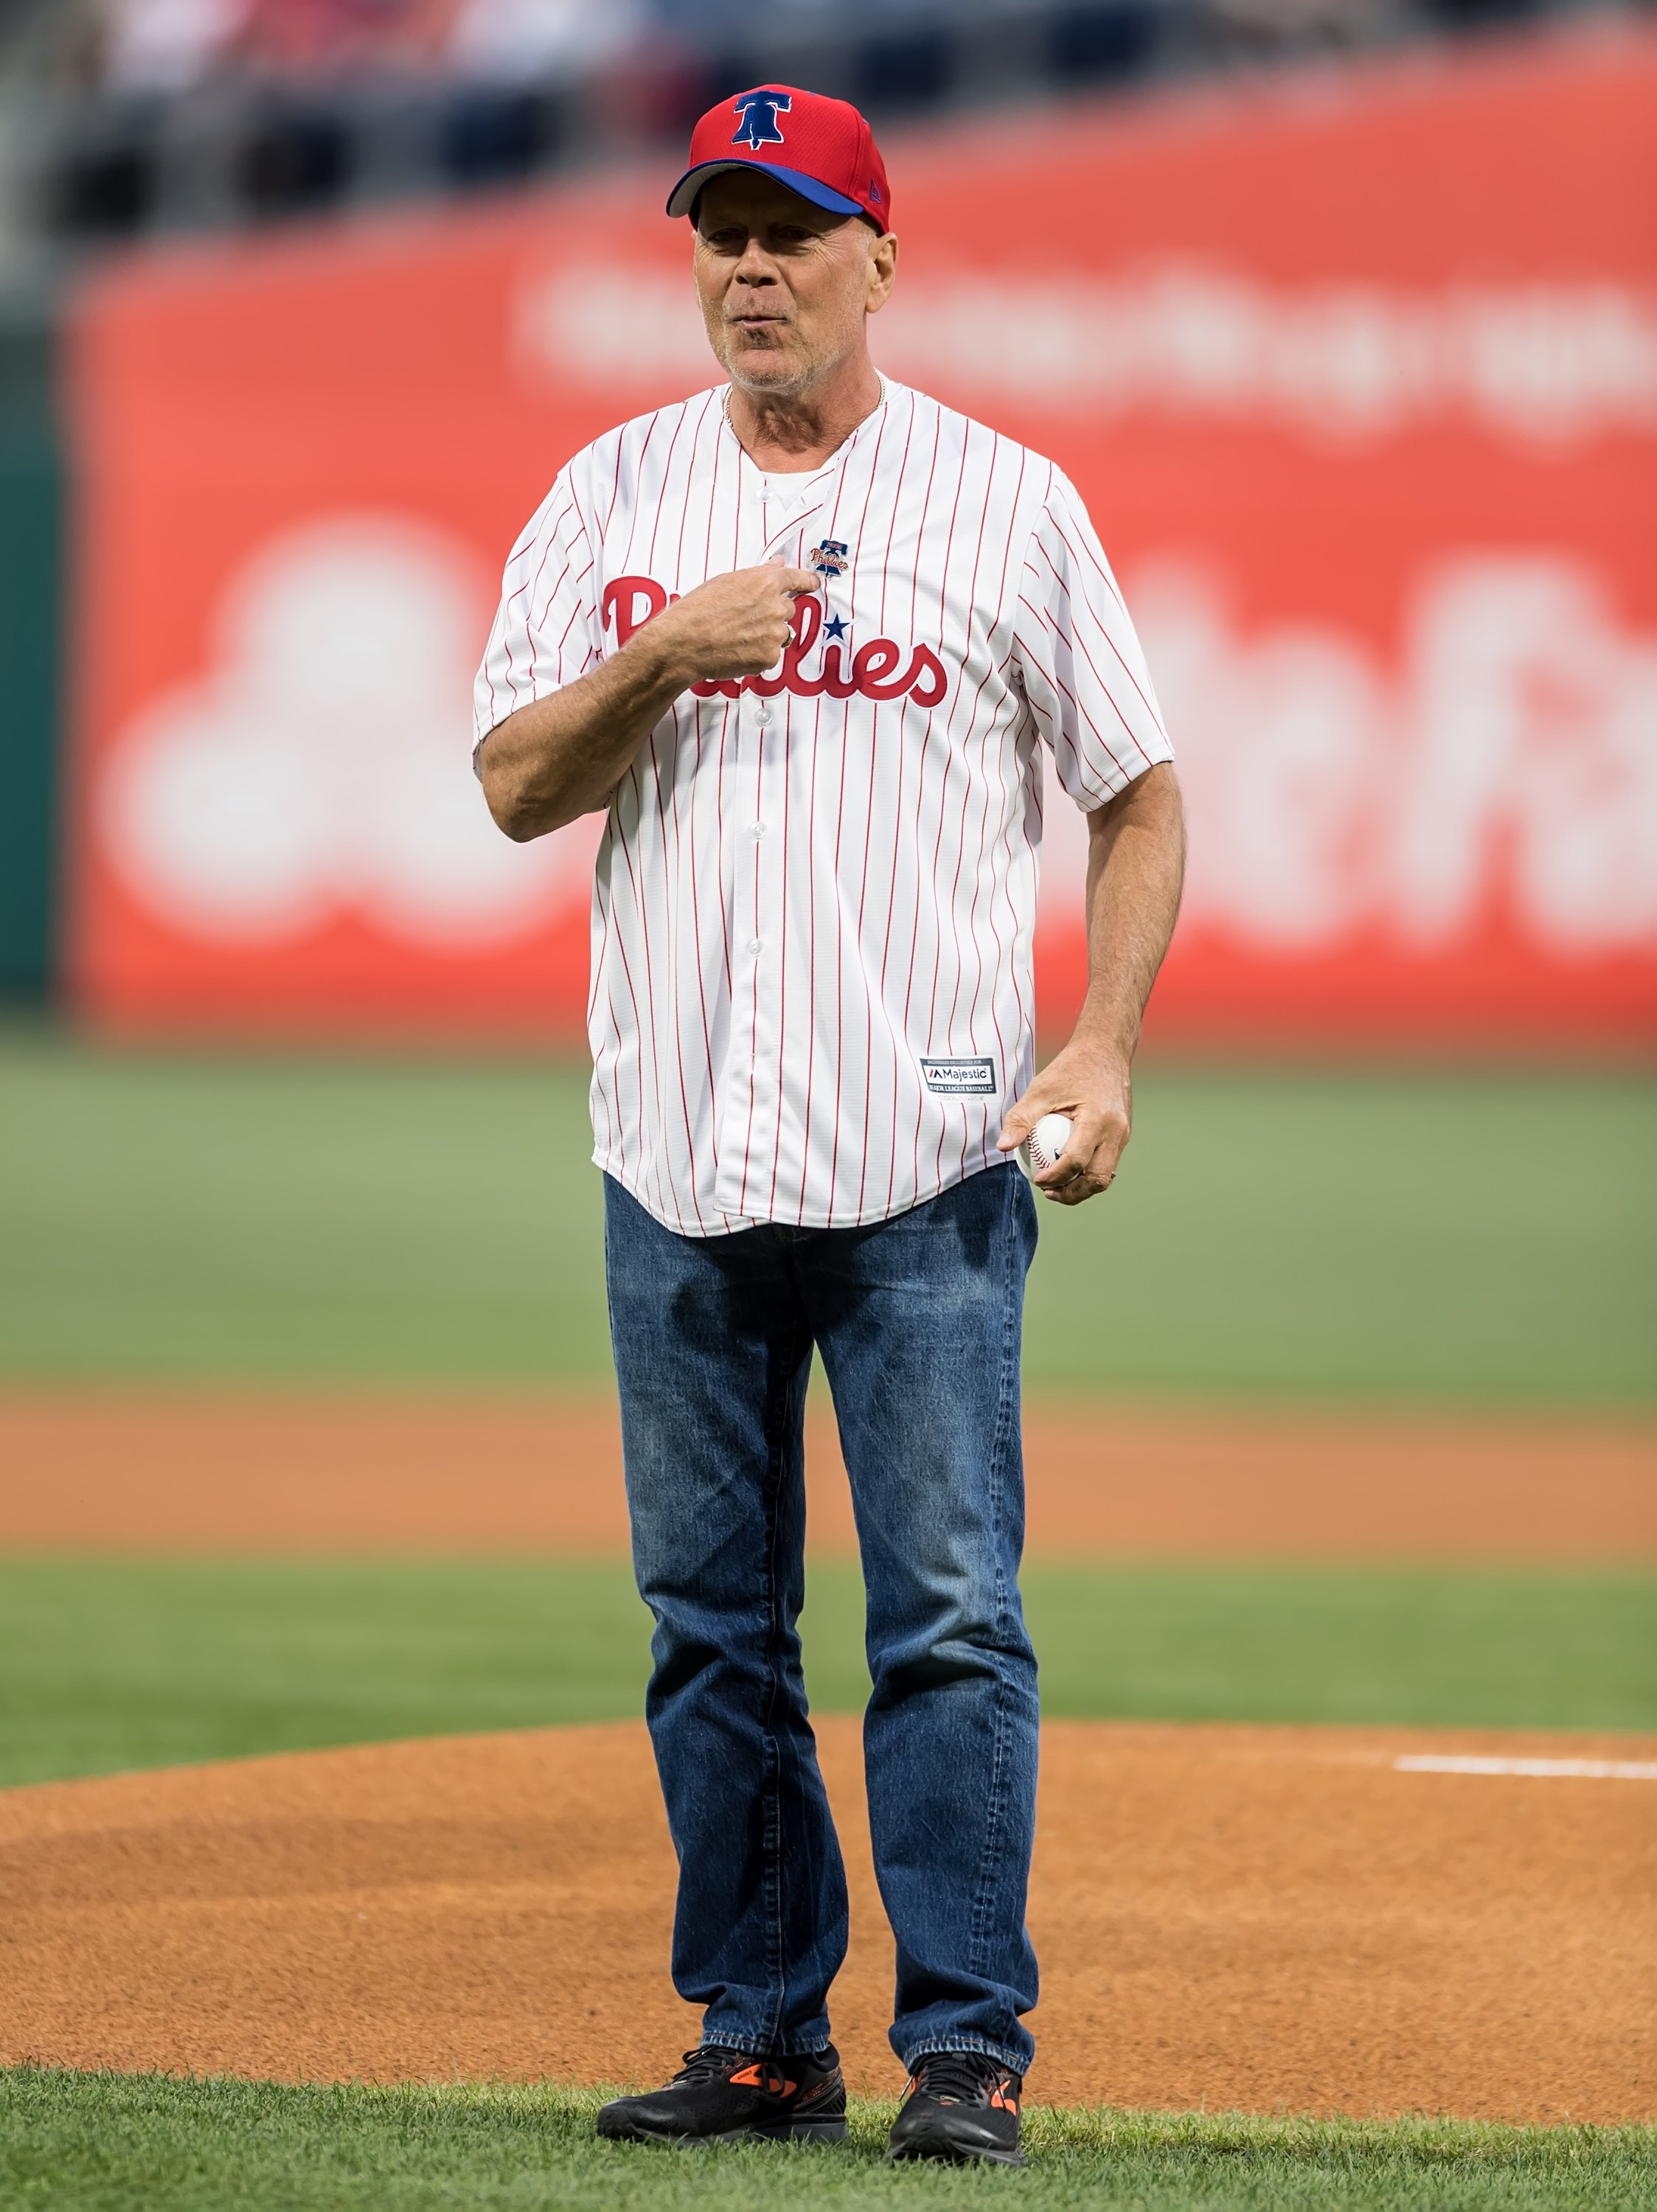 Bruce Willis throwing a ceremonial pitch in Philadelphia 2019. | Source: Getty Images